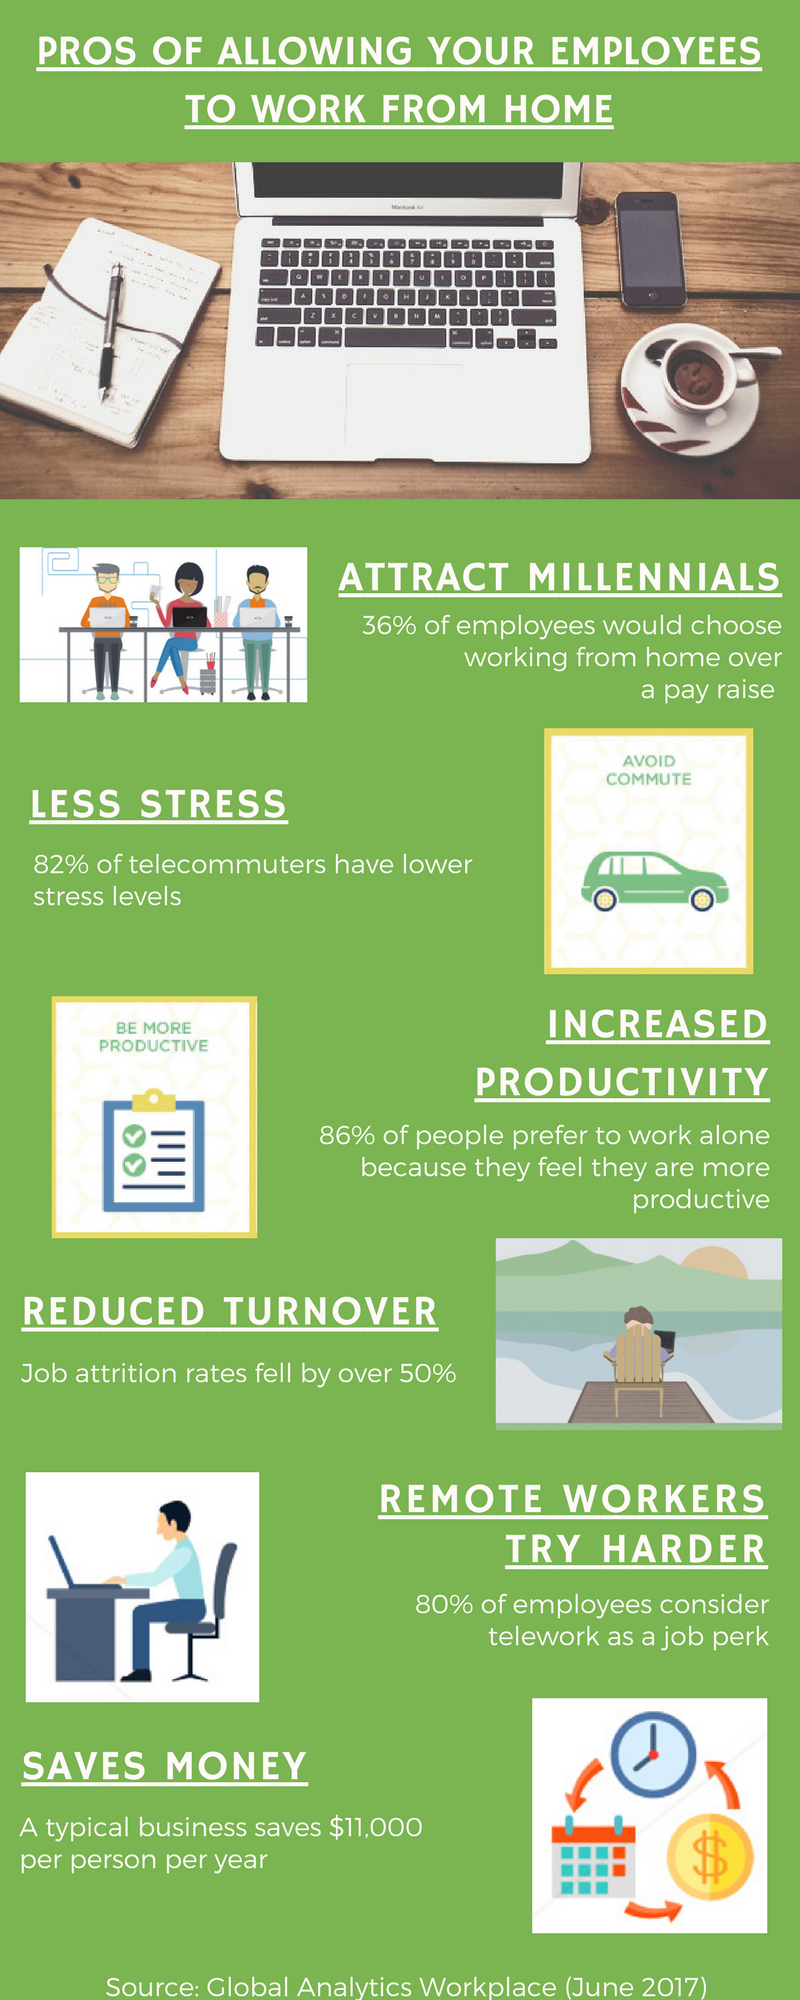 Pros of Allowing Your Employees to Work From Home [Infographic]